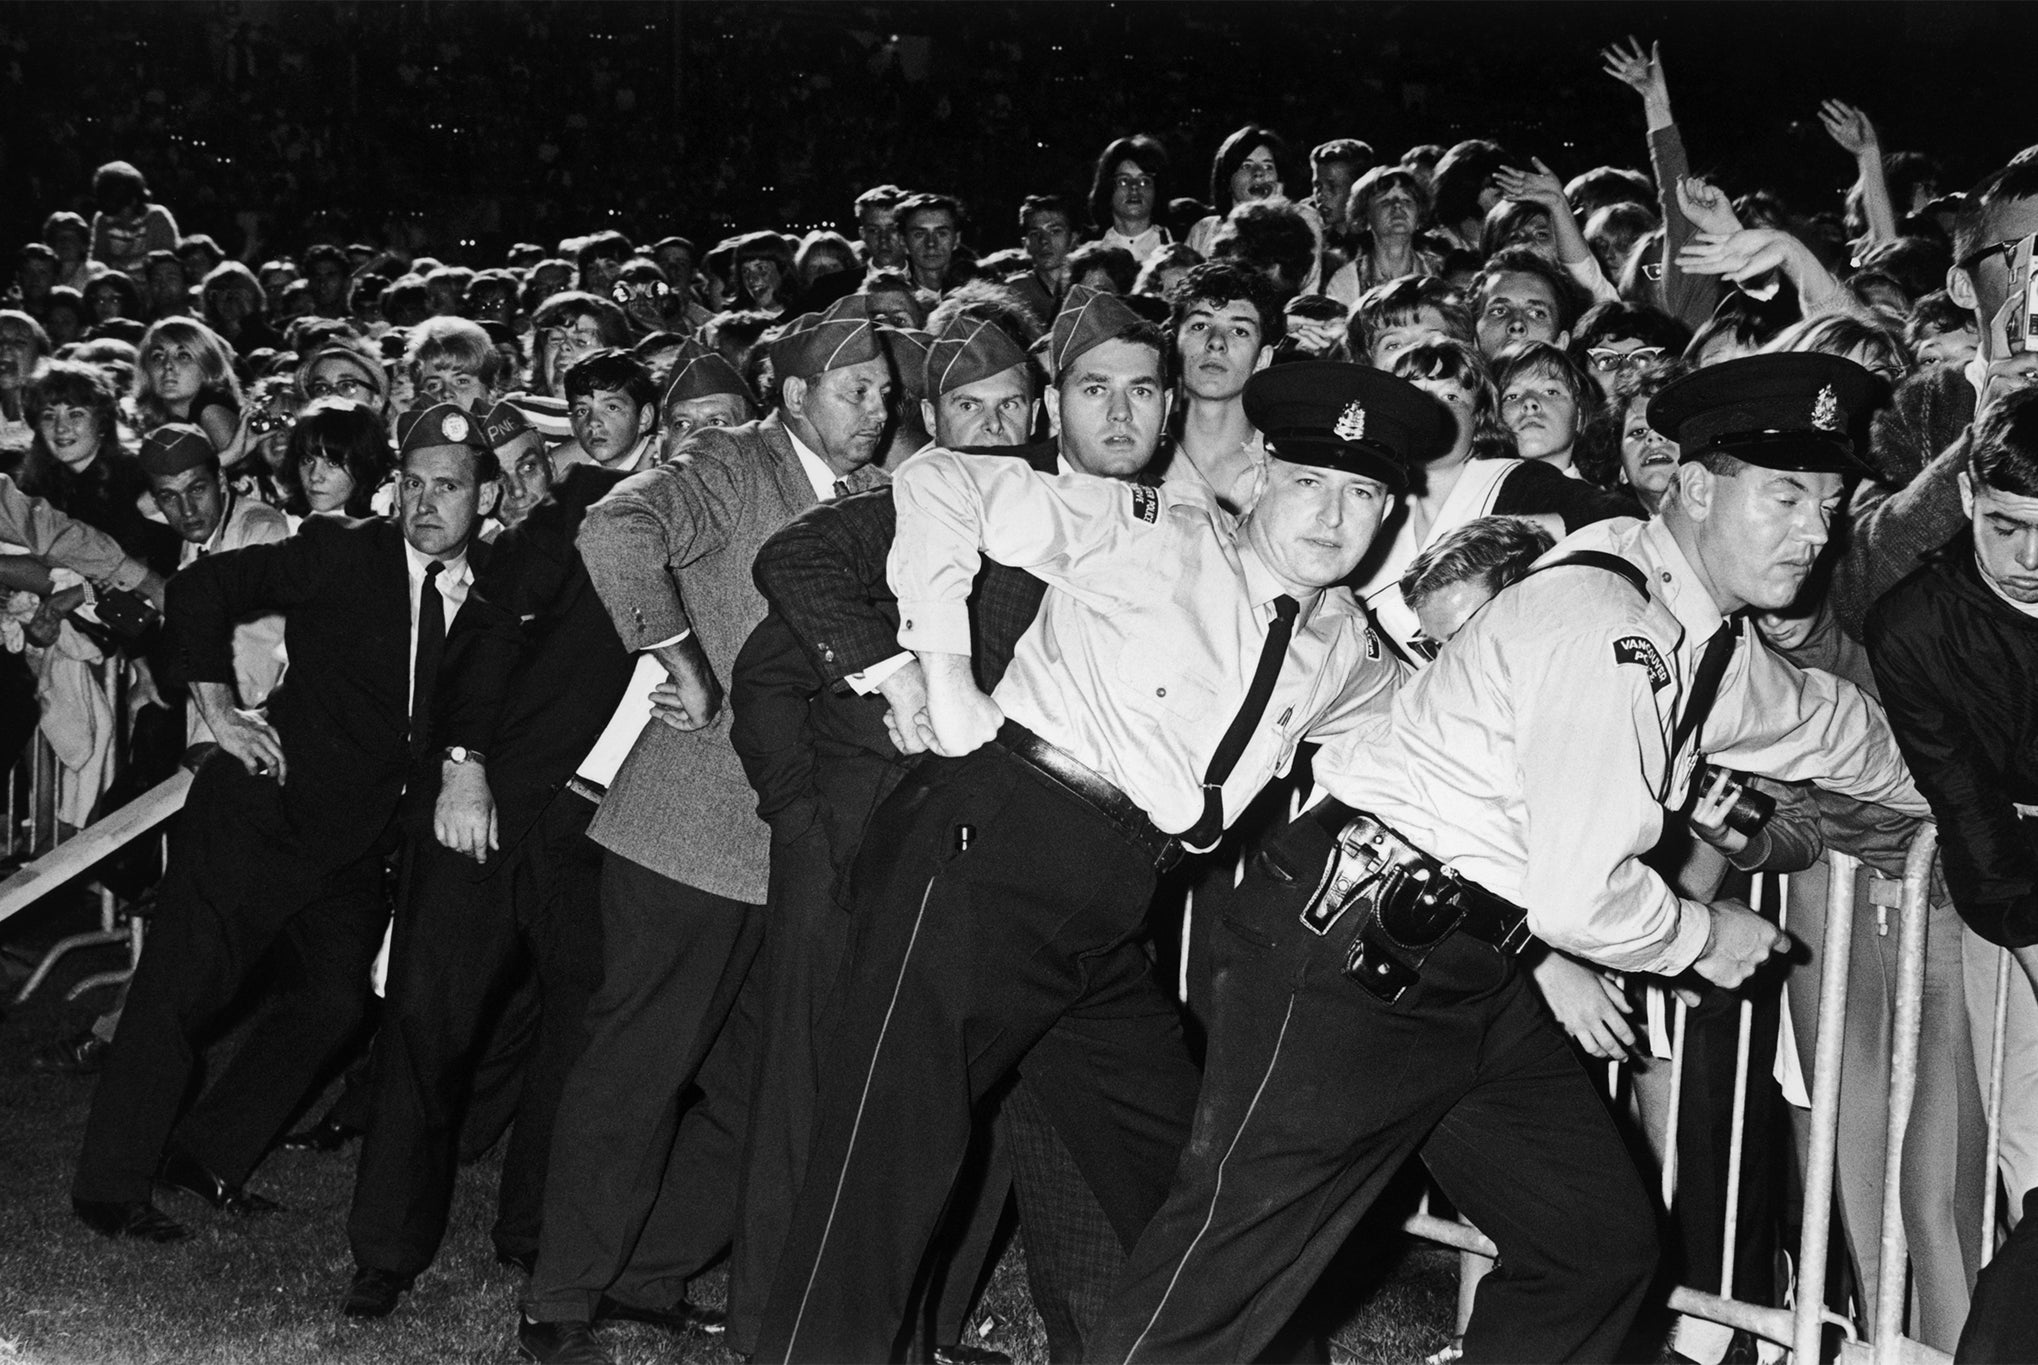 Police and security guards hold back Beatles fans at a concert in Vancouver during the group’s North American tour in 1964